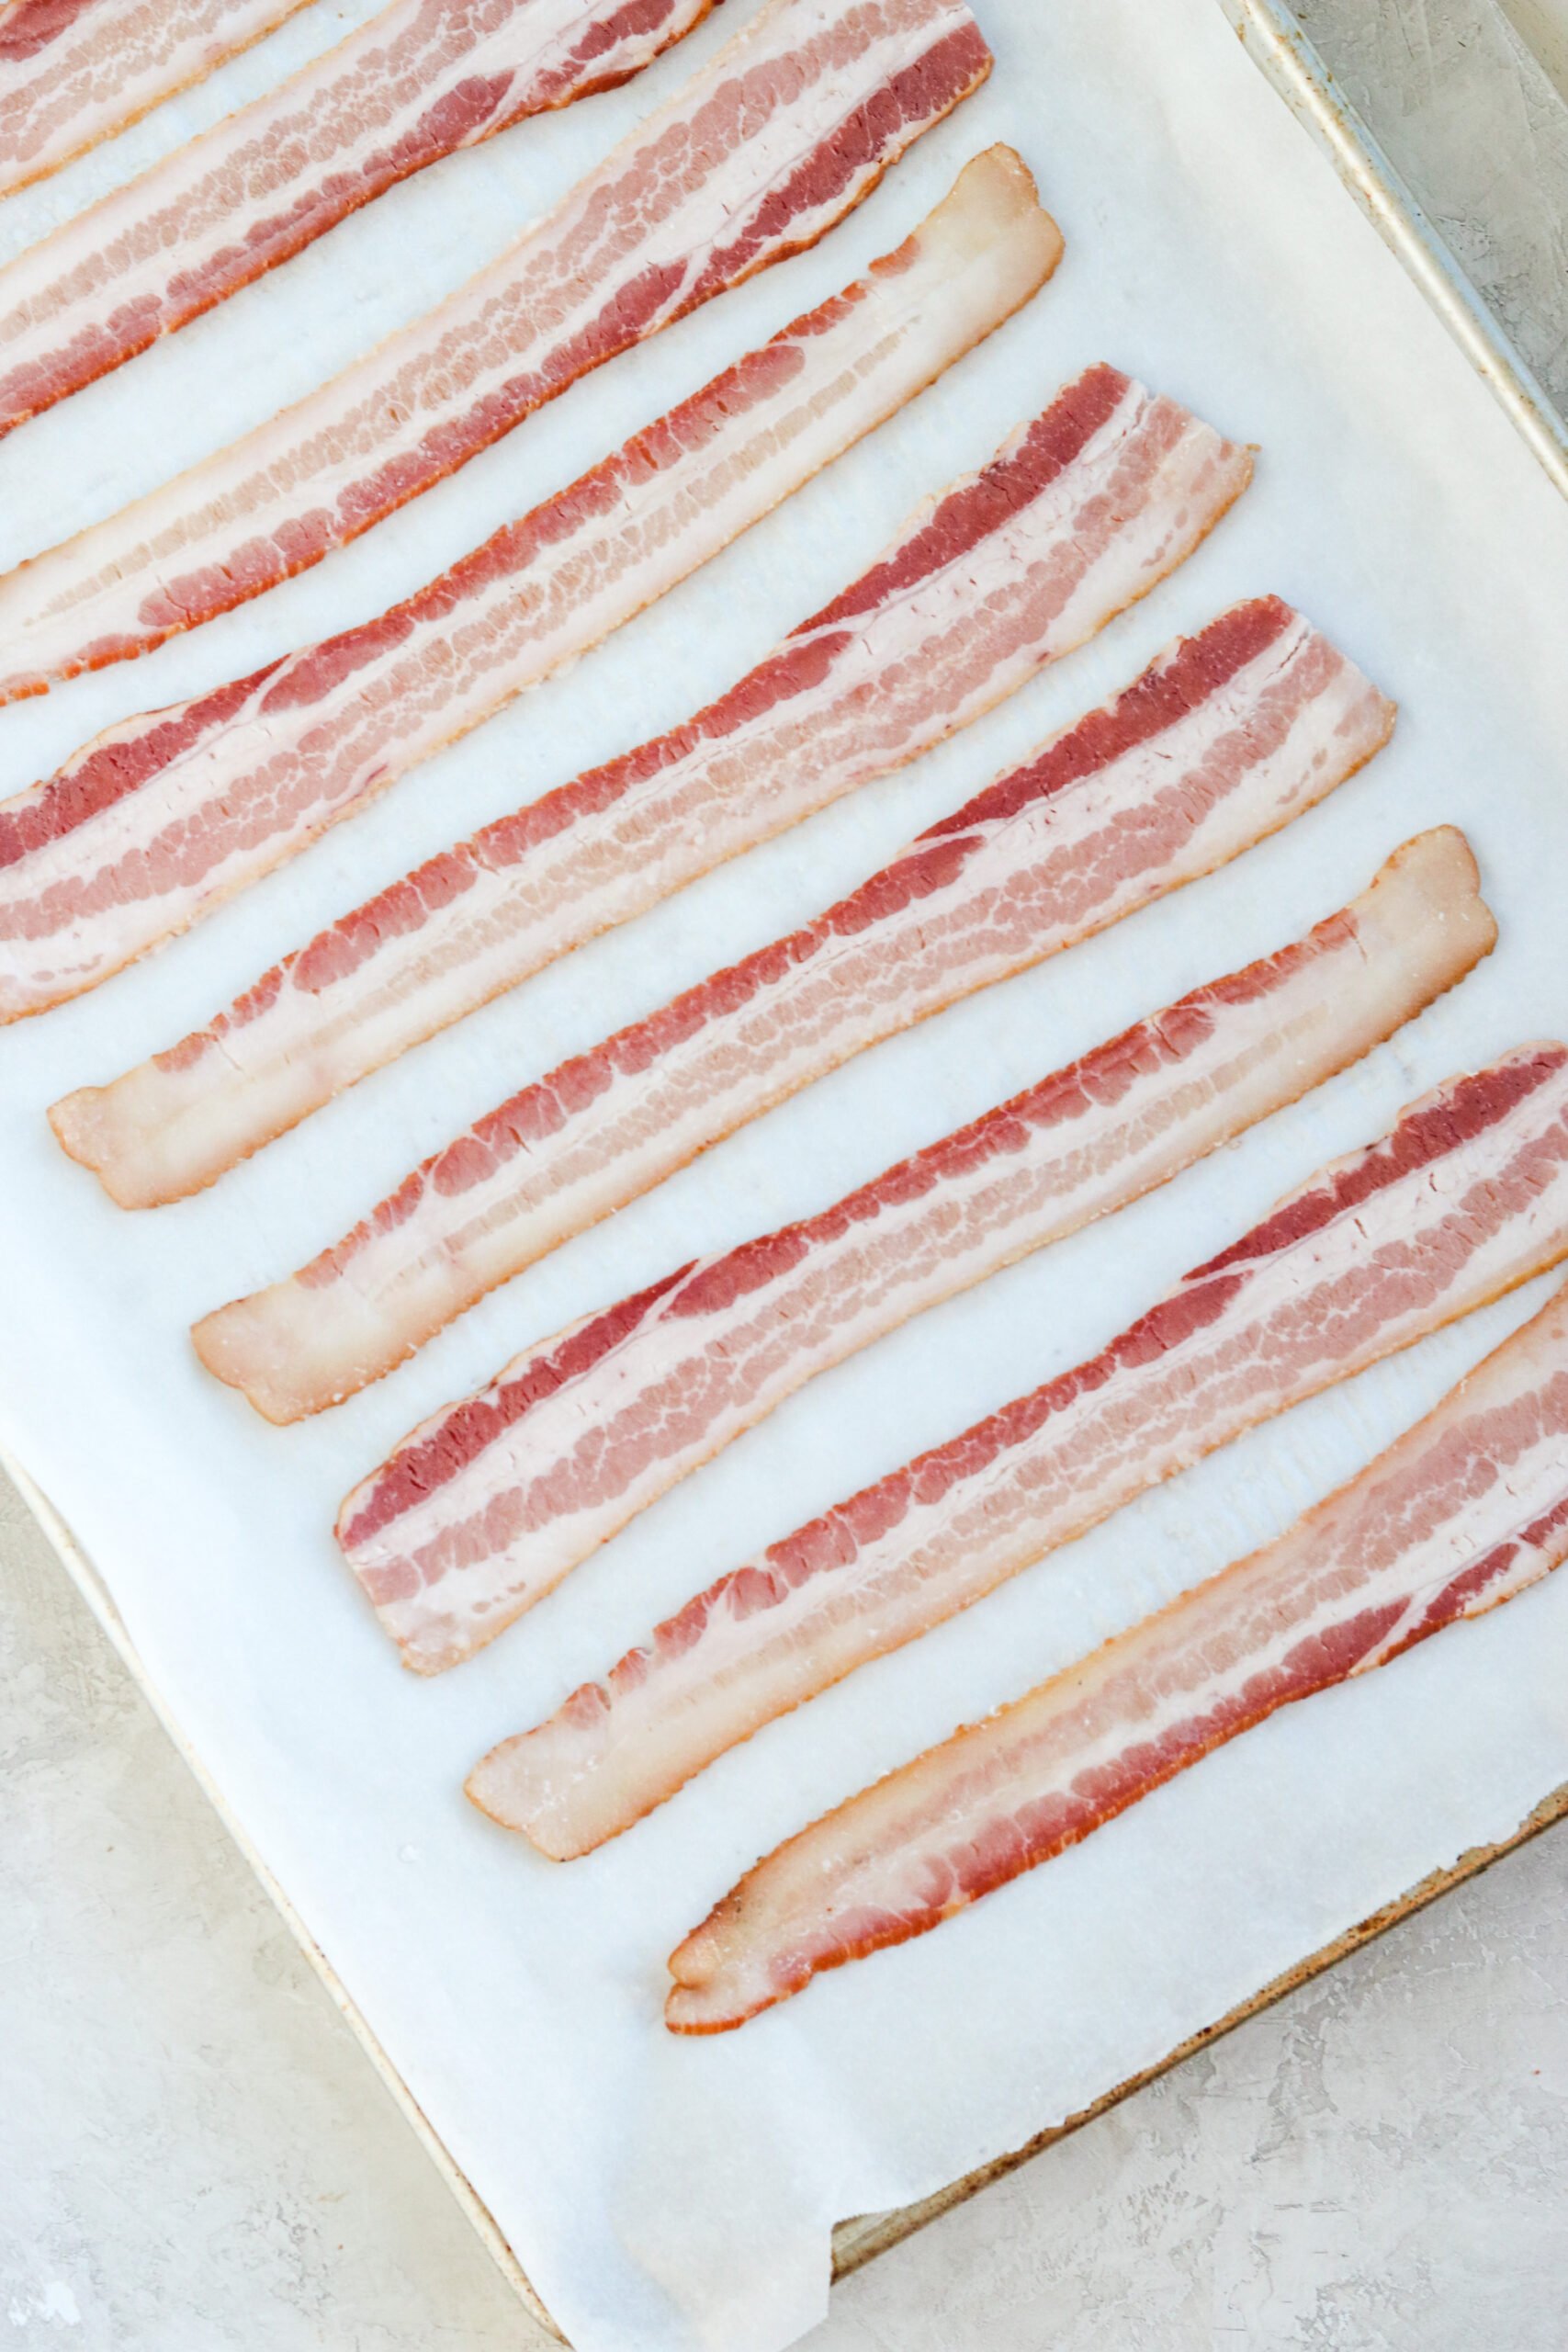 strips of bacon on a parchment paper lined baking sheet